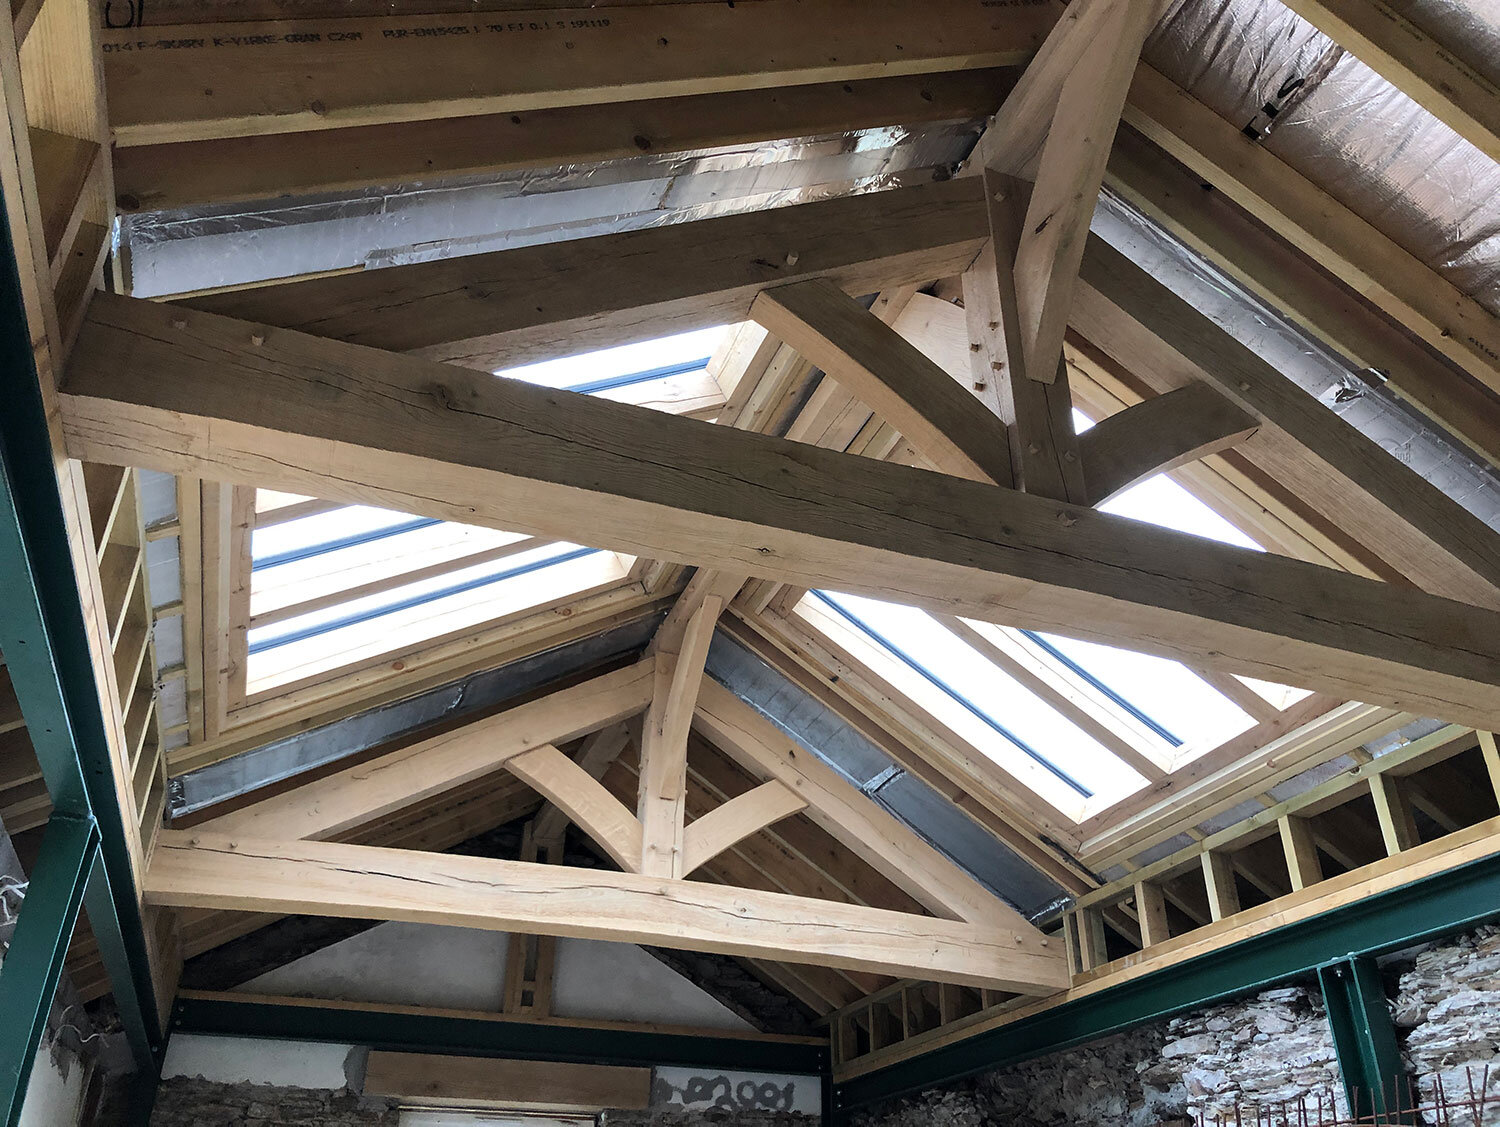 Completed oak and purlin framed roof for stone mill in Devon